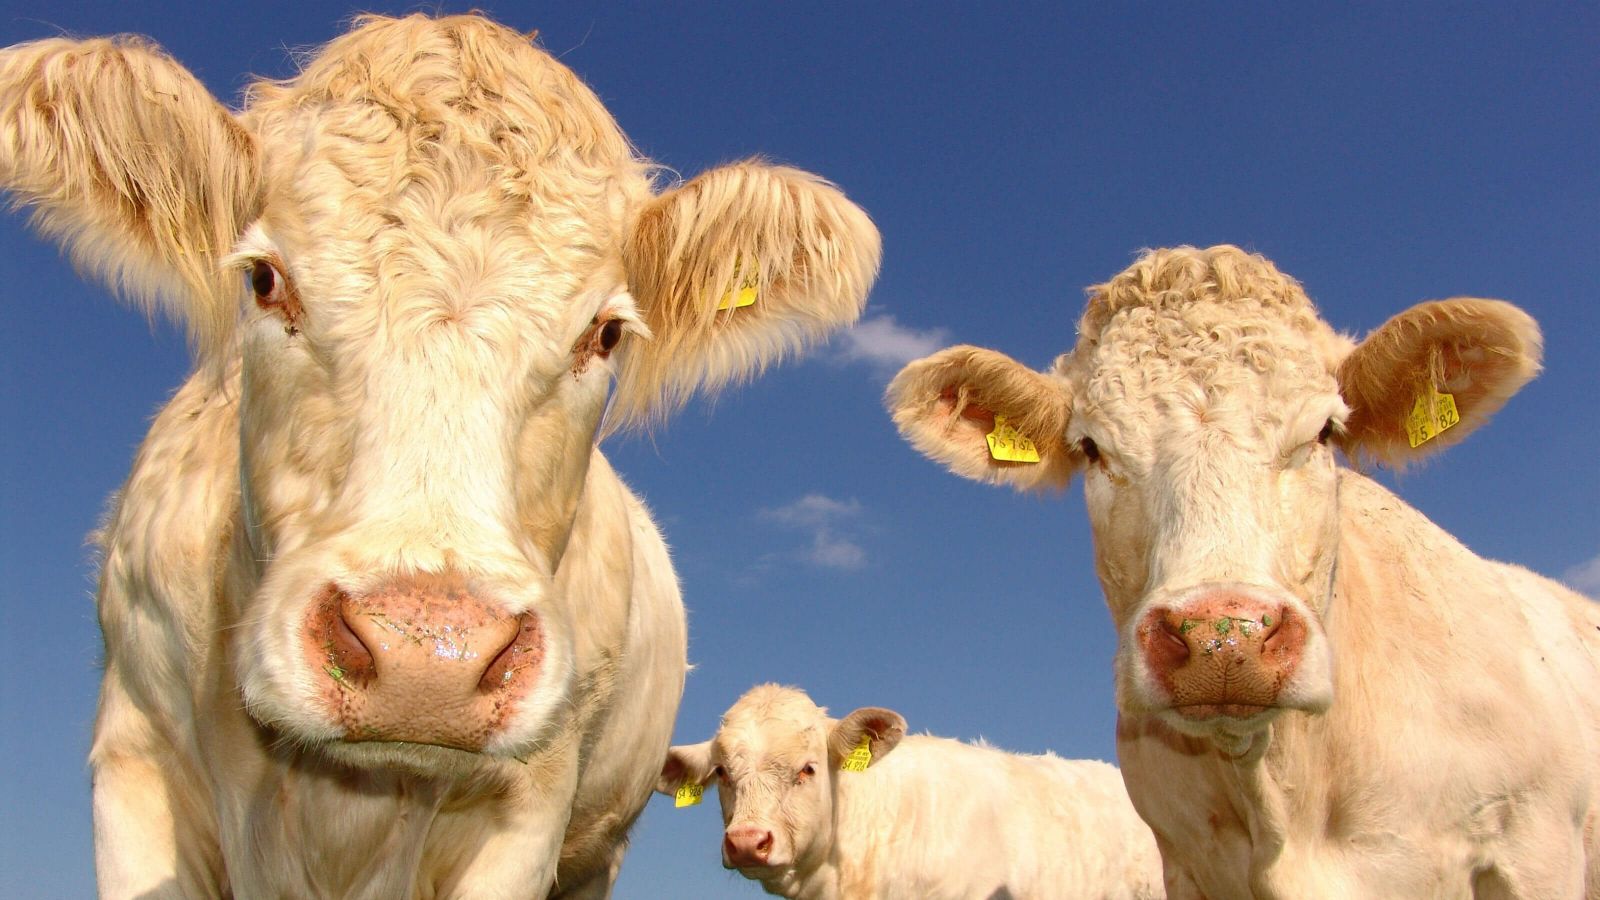 Three hornless blonde cows with wet grassy snouts peer into the camera.